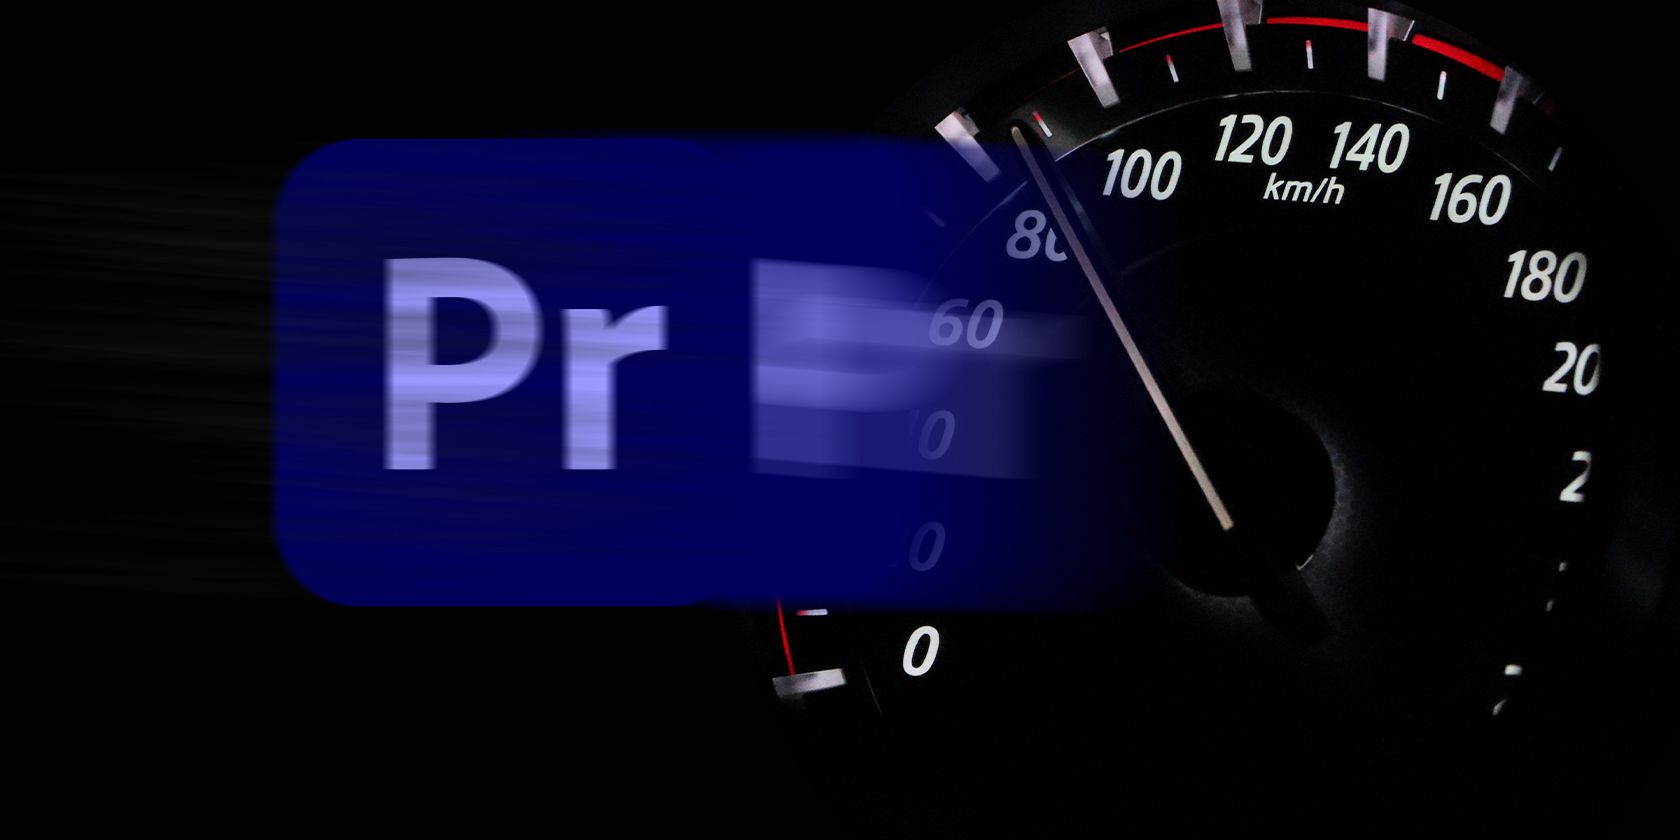 Premiere Pro moving at great speed, as a speedometer sits behind it. This is because it is being optimized thanks to the tricks and tips detailed in this article.